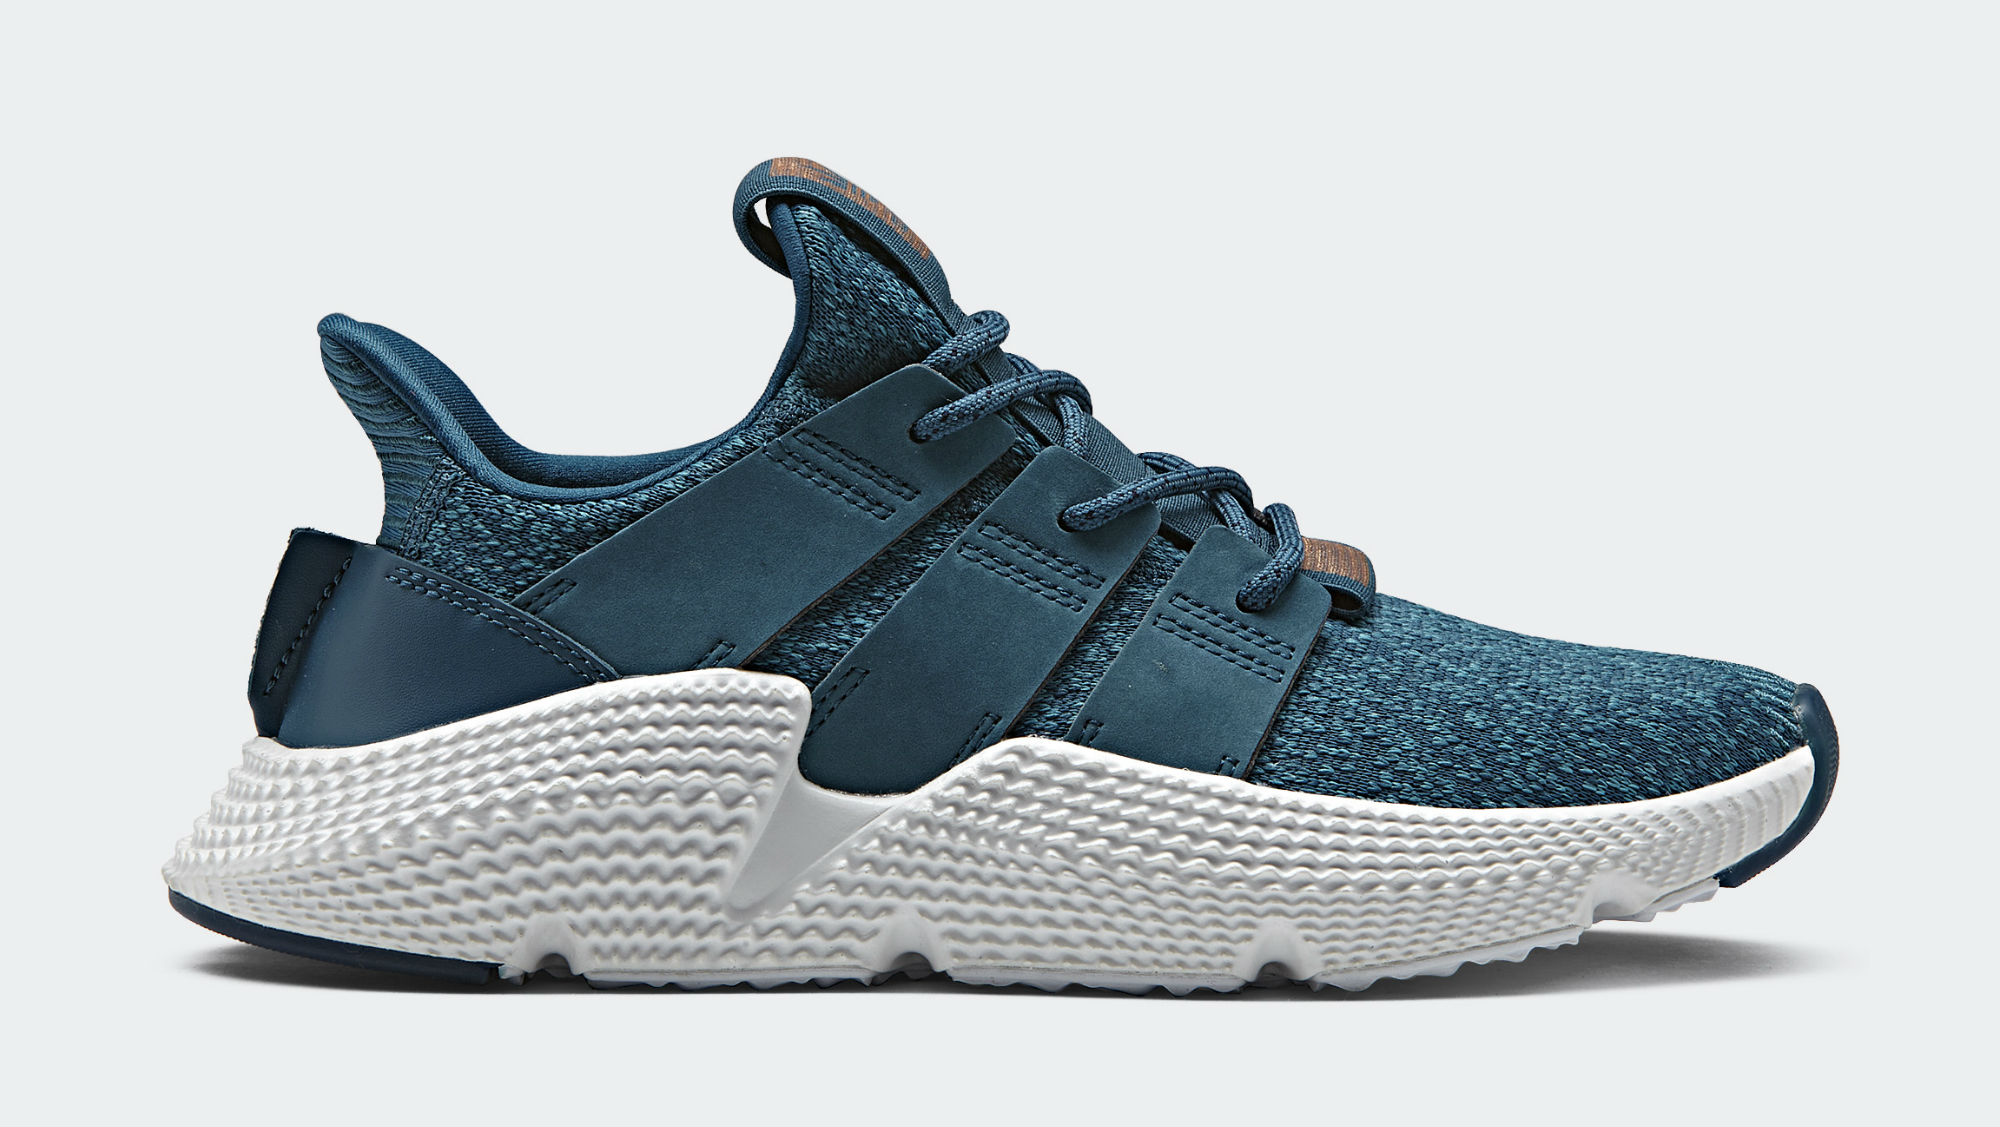 Adidas Prophere Teal Release Date CQ2541 Profile